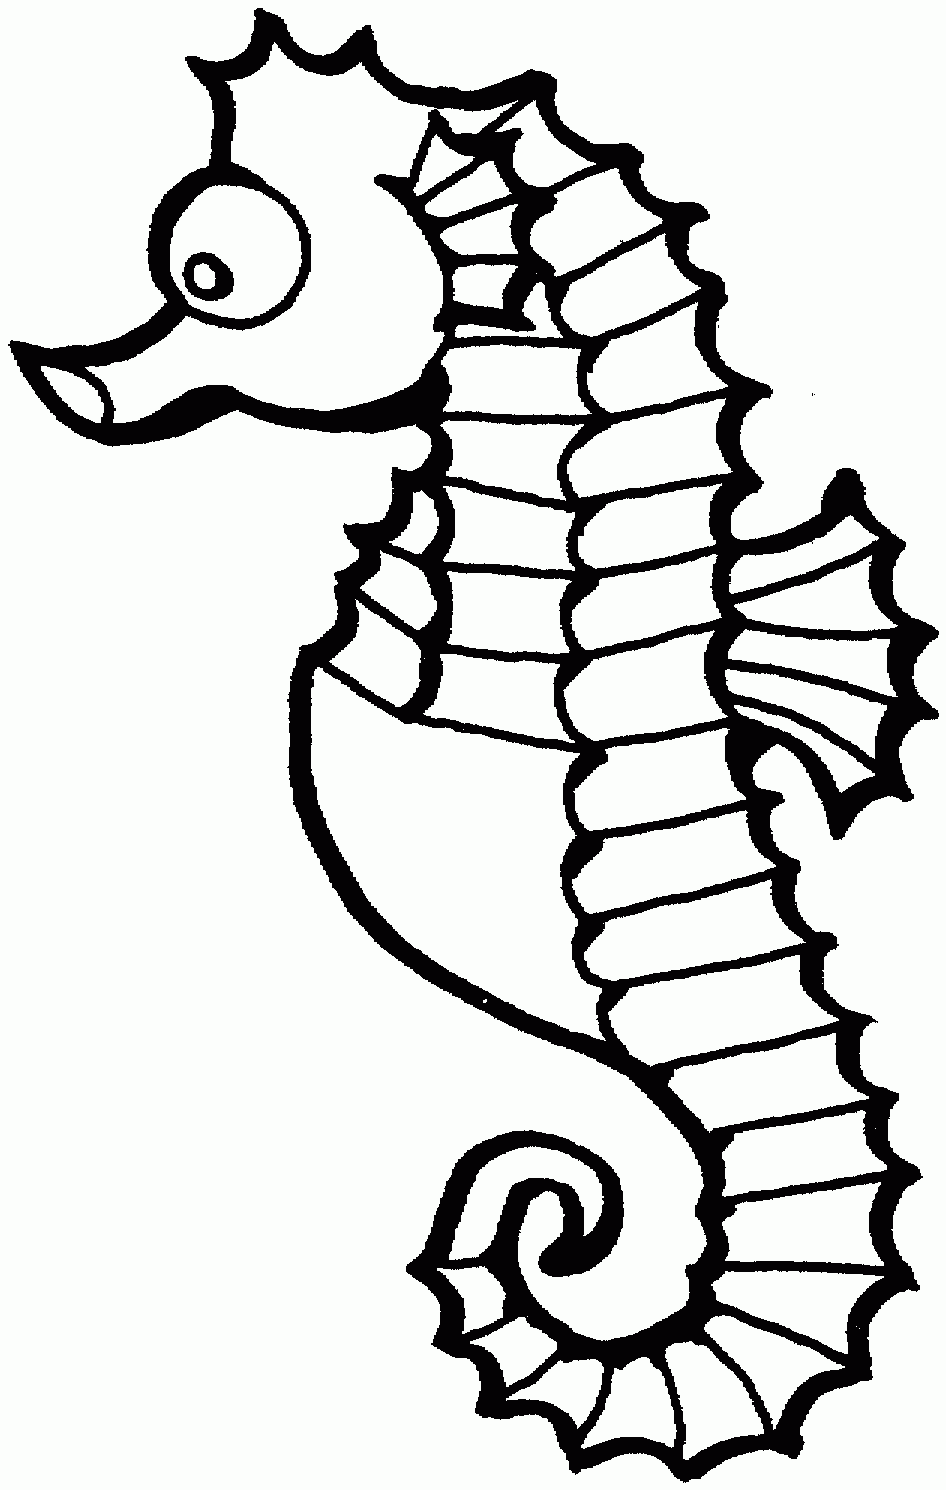 Sea Animals Coloring Pages - Widetheme